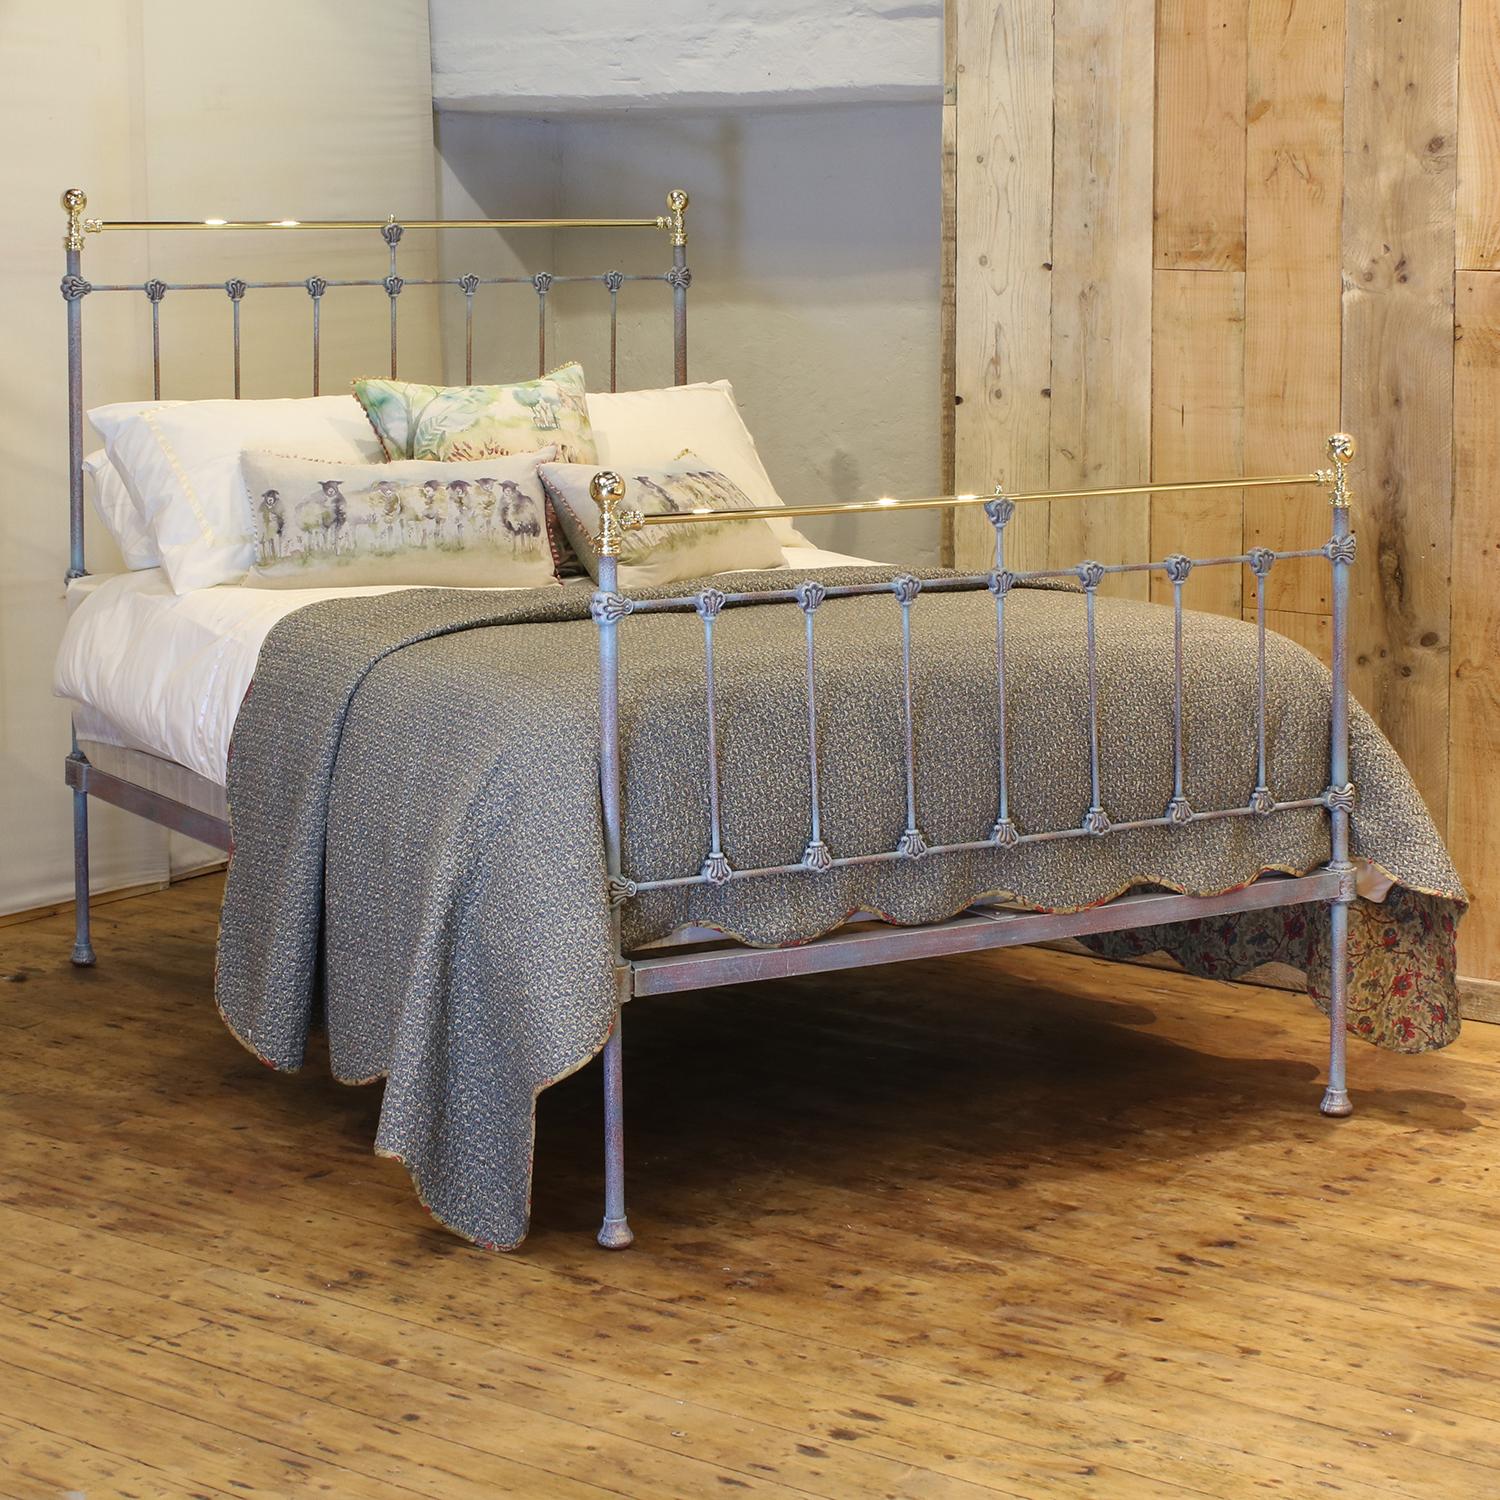 Late Victorian antique brass and iron bed finished in blue verdigris, with straight brass top rail, cast collars and round knobs. 

This bed accepts a double size 4ft 6in wide (54 inch or 135cm) base and mattress.

The price includes a firm solid